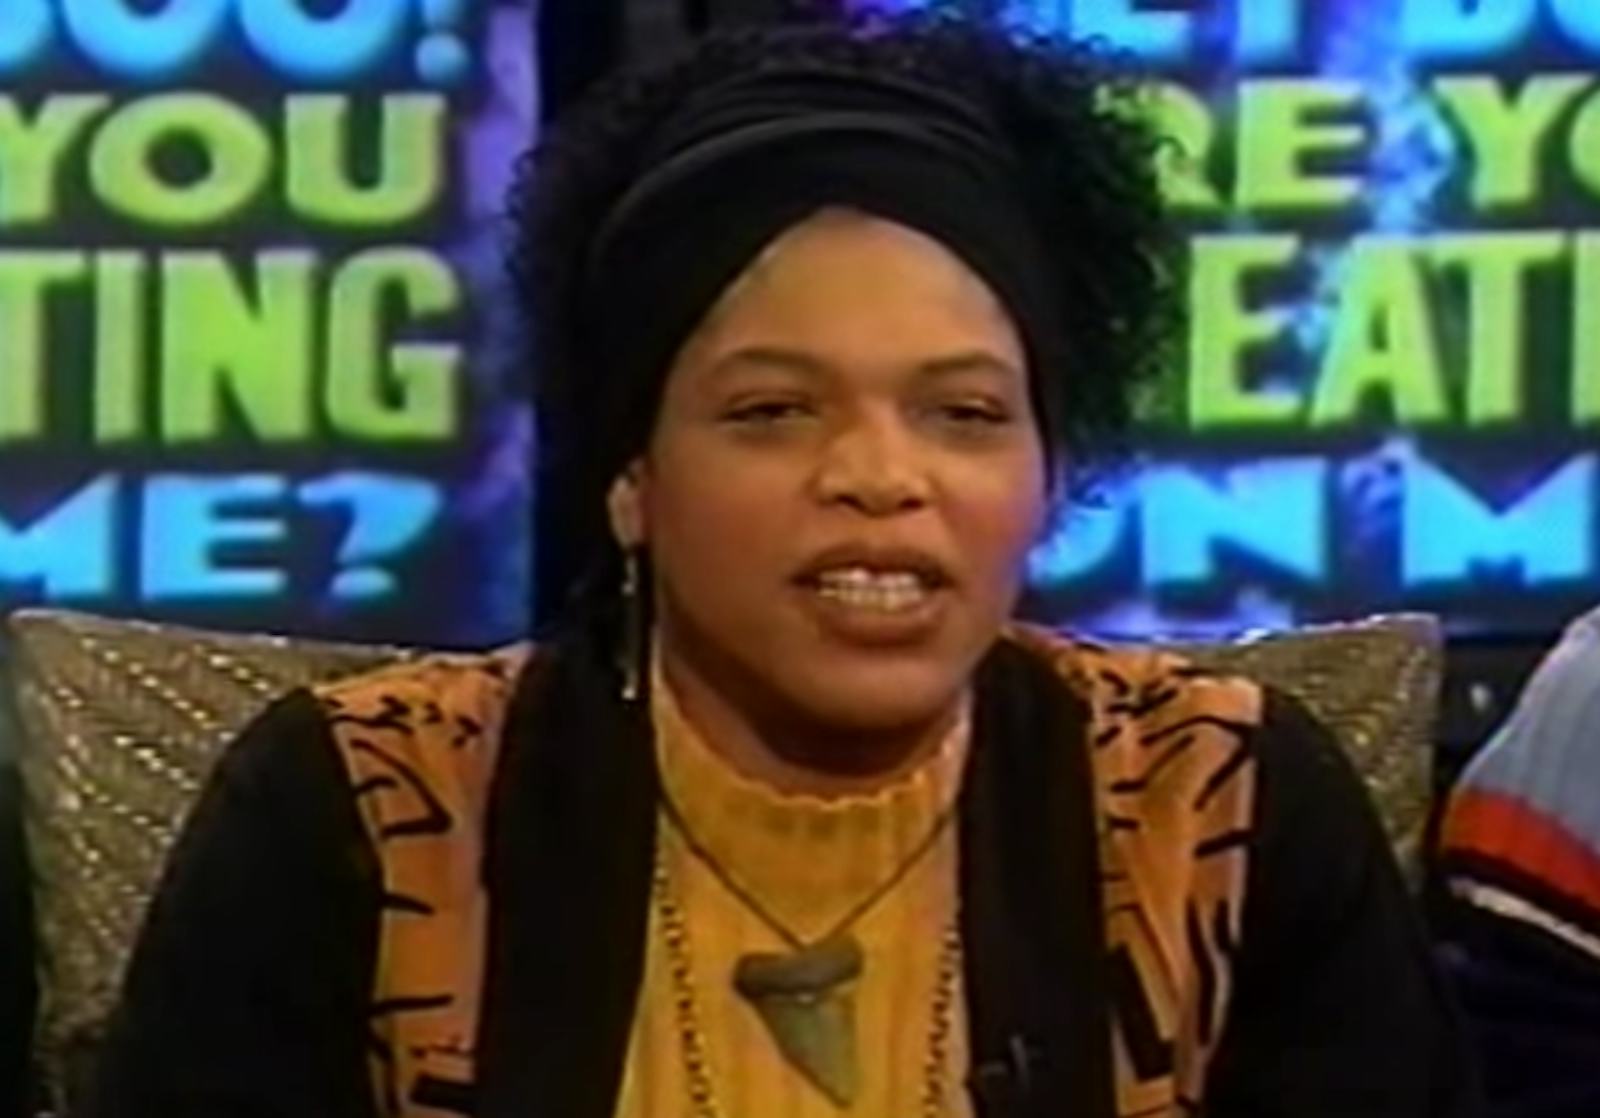 Miss Cleo Was More Than A Tv Psychic And Heres The Impressive Proof